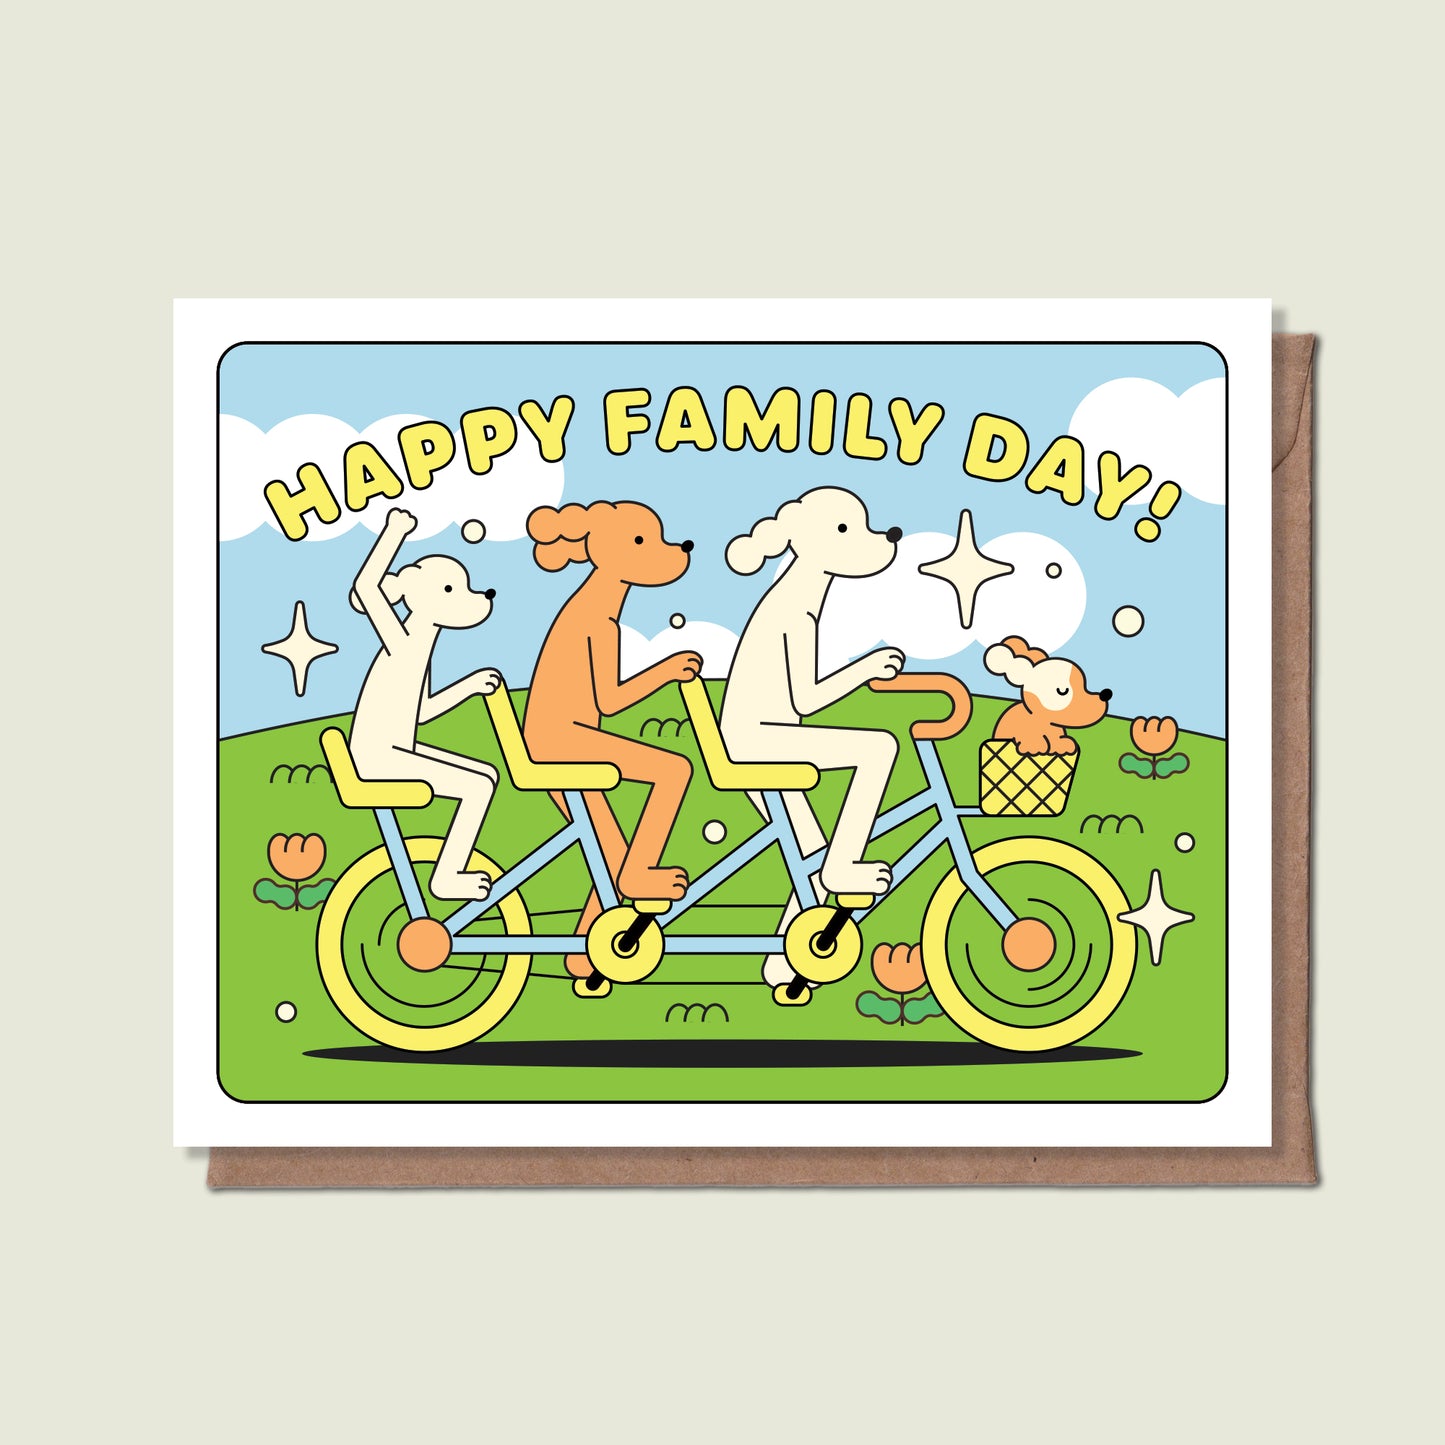 Happy Family Day Greeting Card